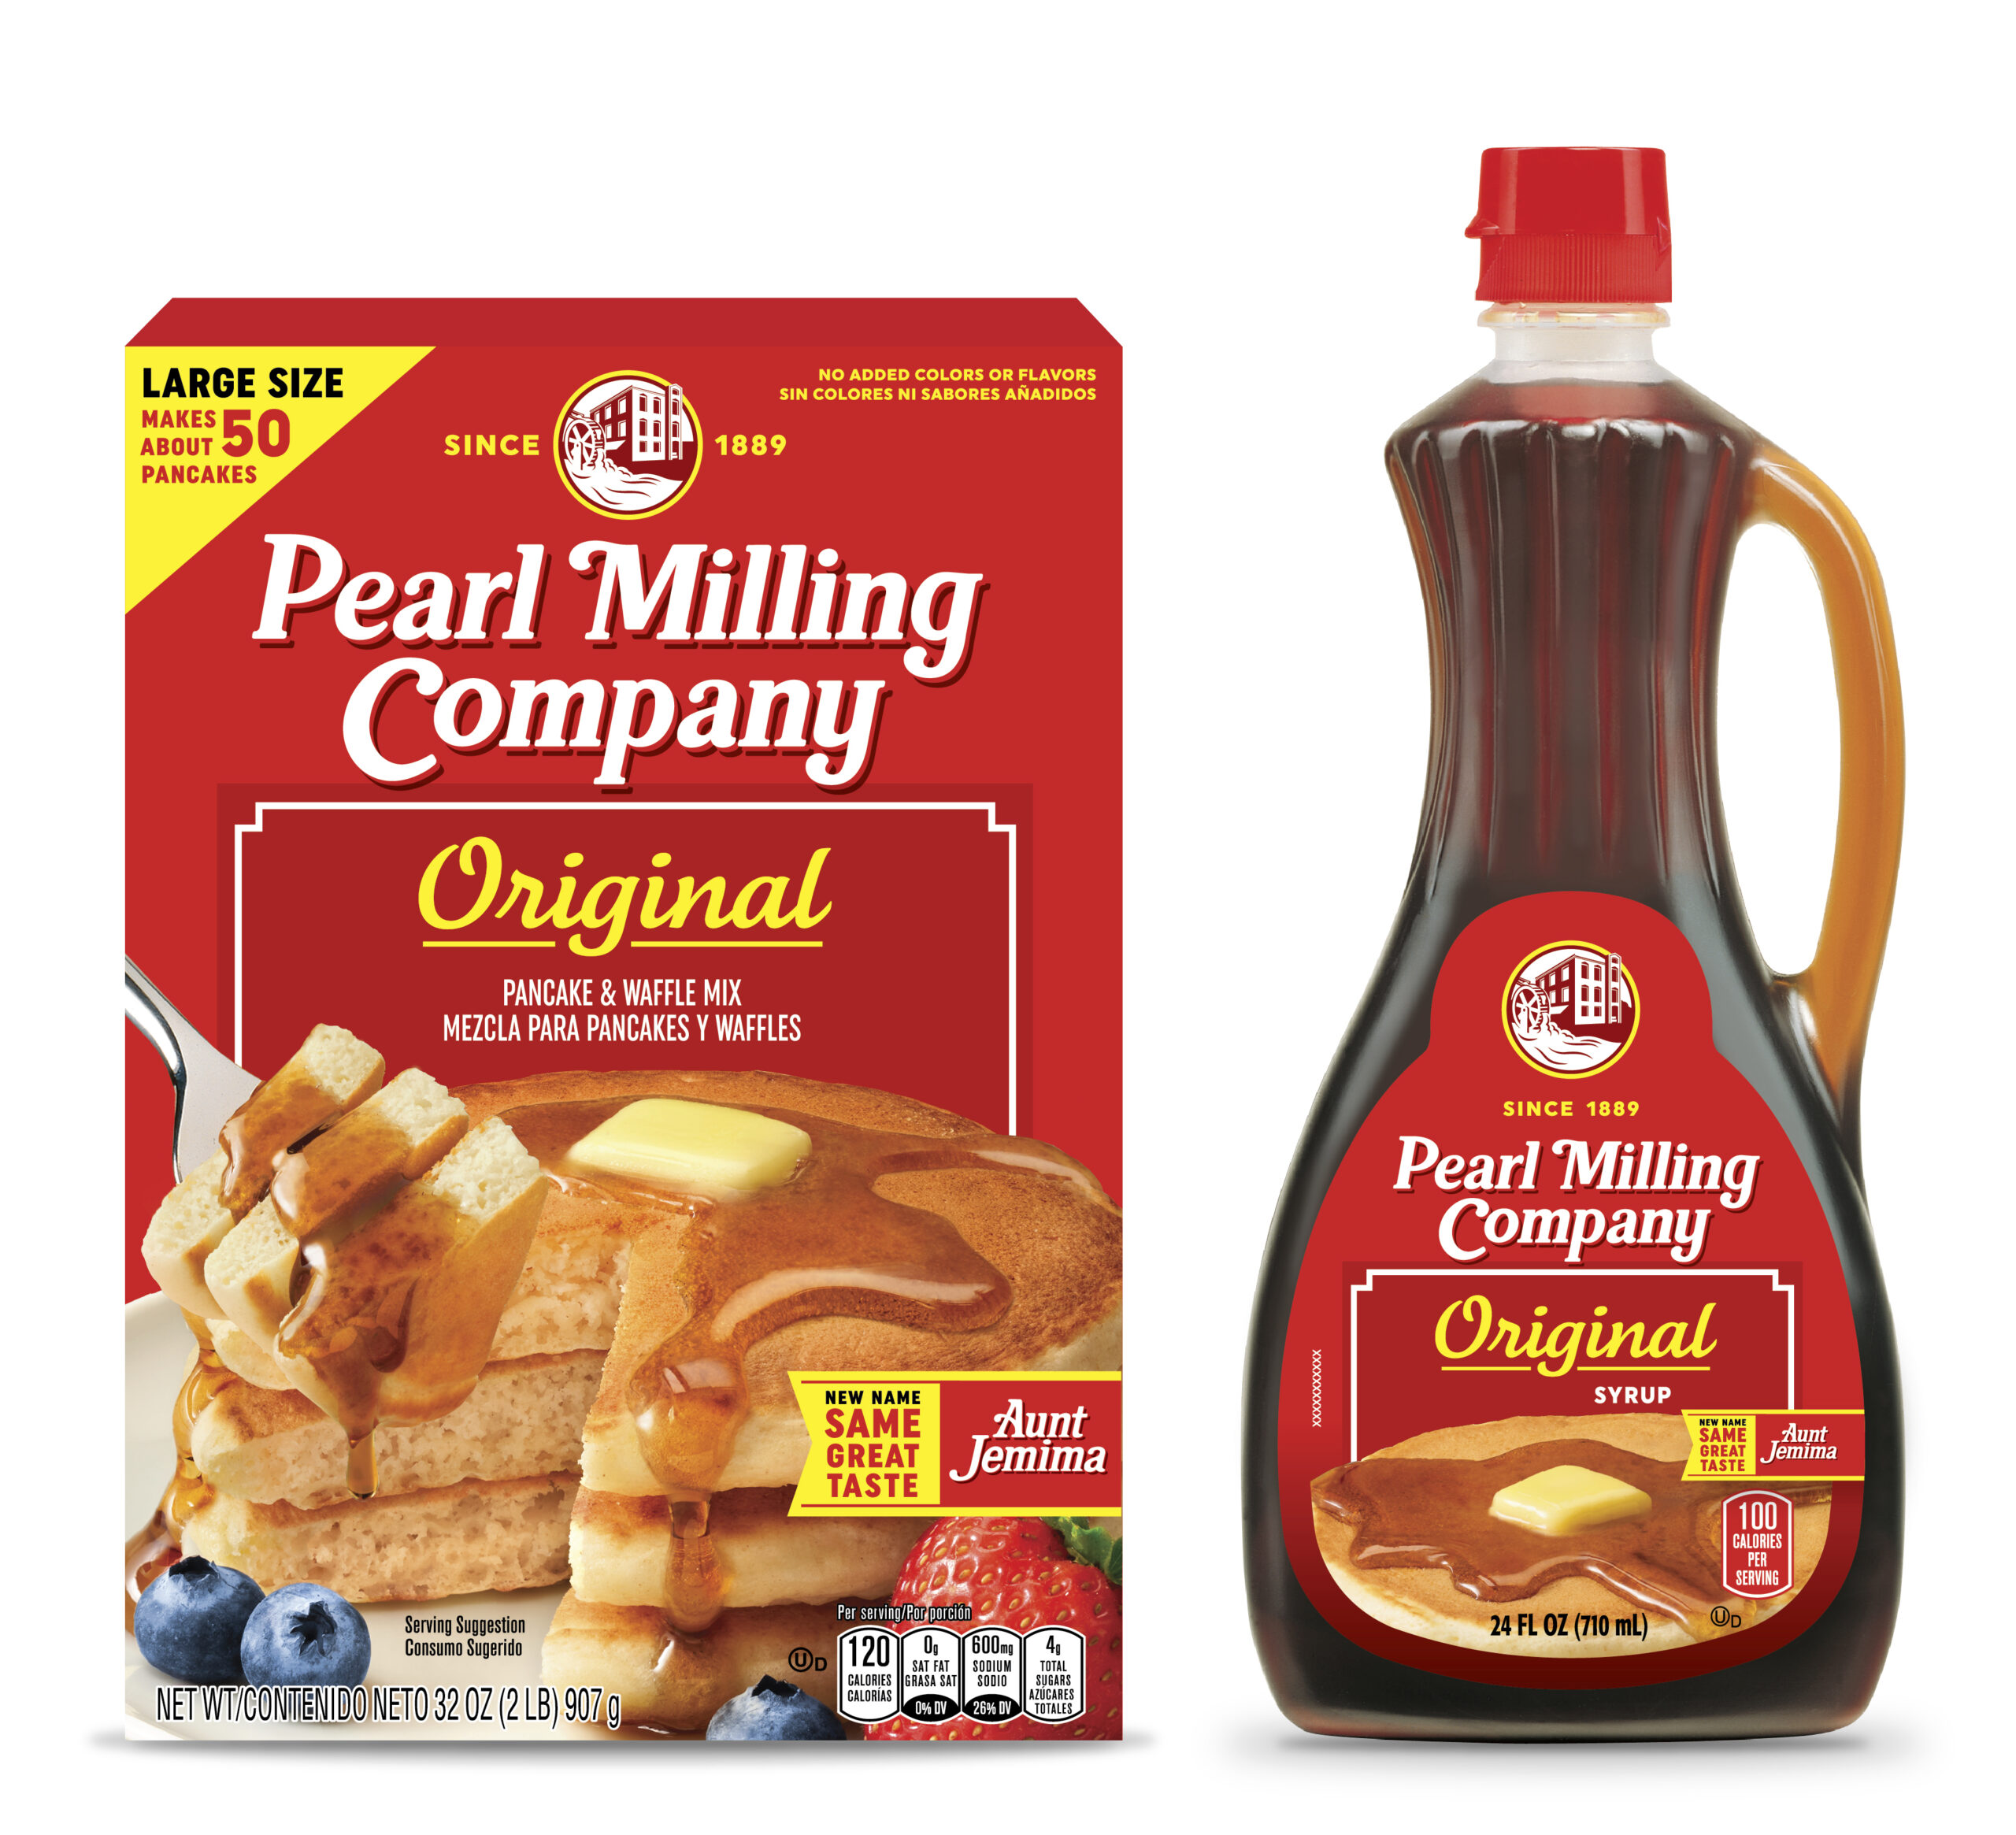 This image provided by PepsiCo, Inc., shows Quaker Oats' Pearl Milling Company brand pancake mix and syrup, formerly the Aunt Jemima brand. Aunt Jemima products will continue to be sold until June 2021, when the packaging will officially change over. (PepsiCo, Inc. via AP)